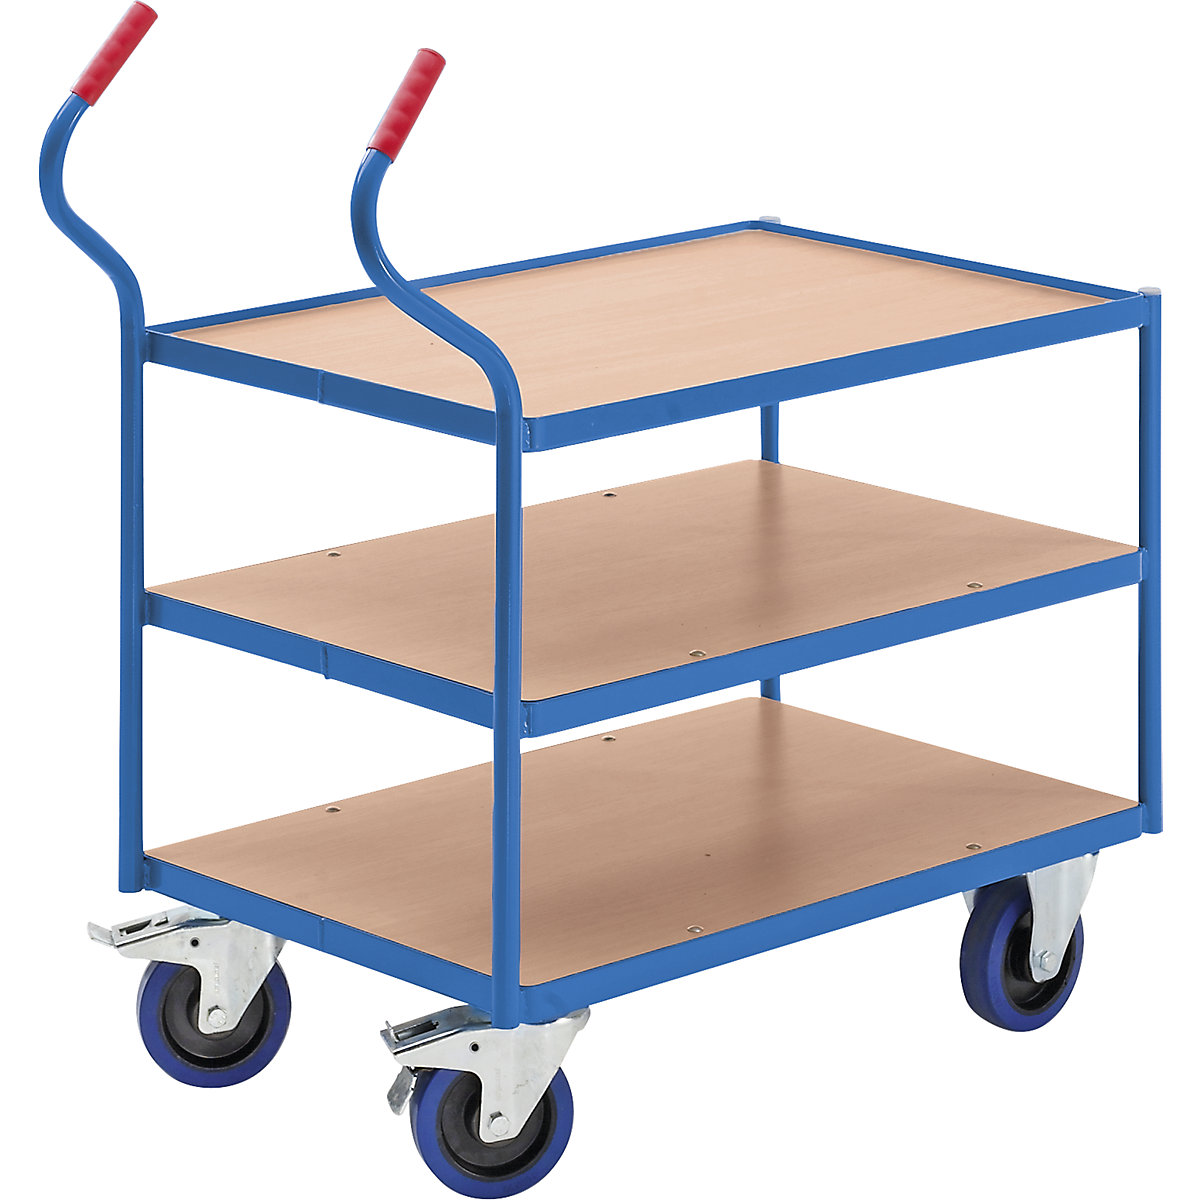 Industrial table trolley – eurokraft pro, fully elastic tyres, non-marking, shelf heights 235 / 500 / 765 mm-2